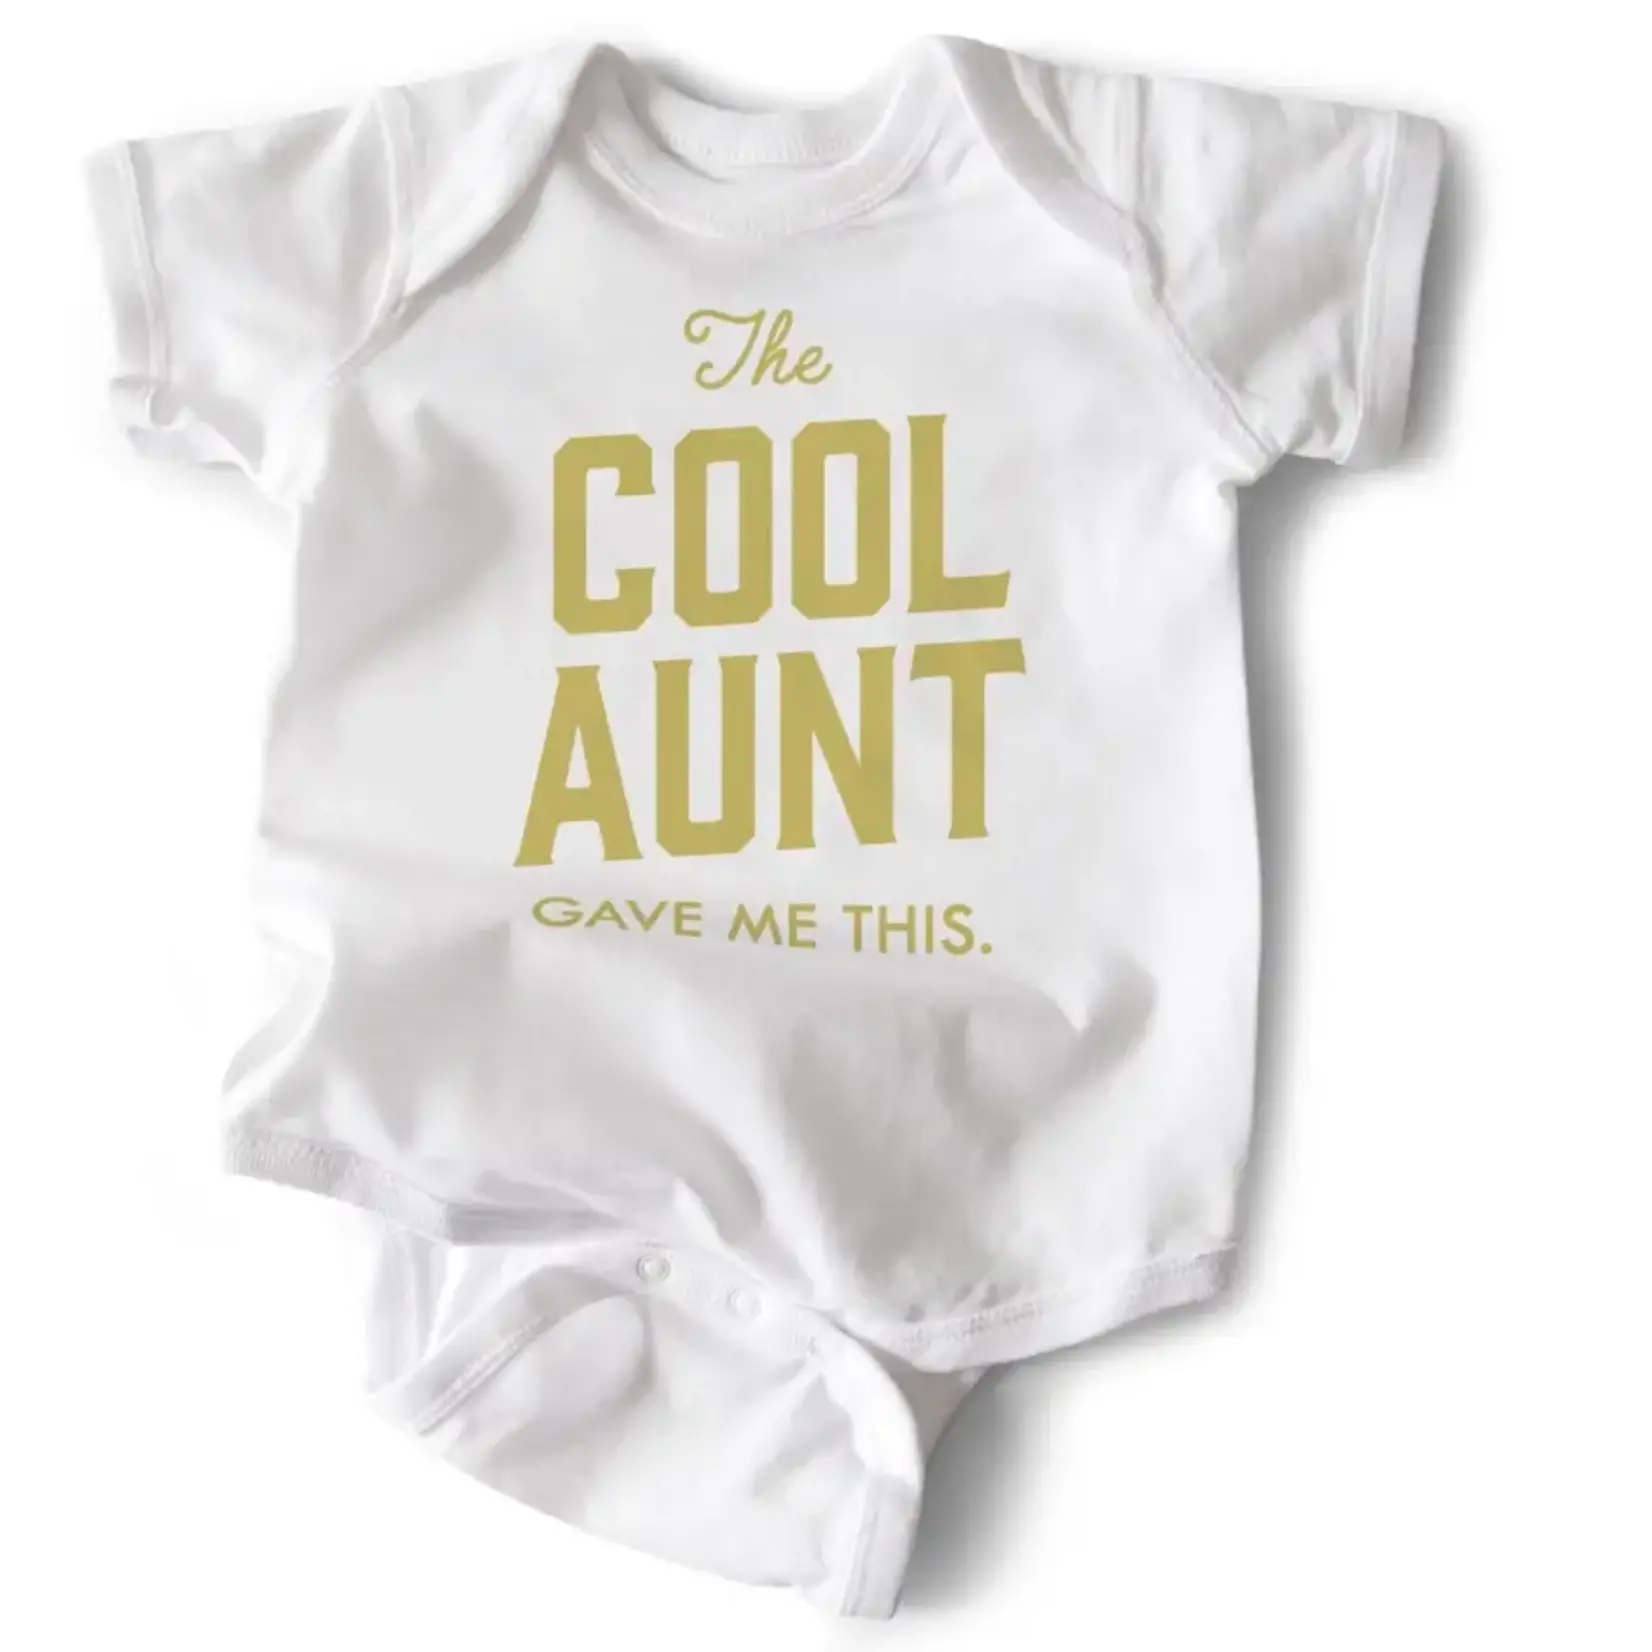 "The Cool Aunt Gave Me This" Baby Onesie | 6-12 Months | White